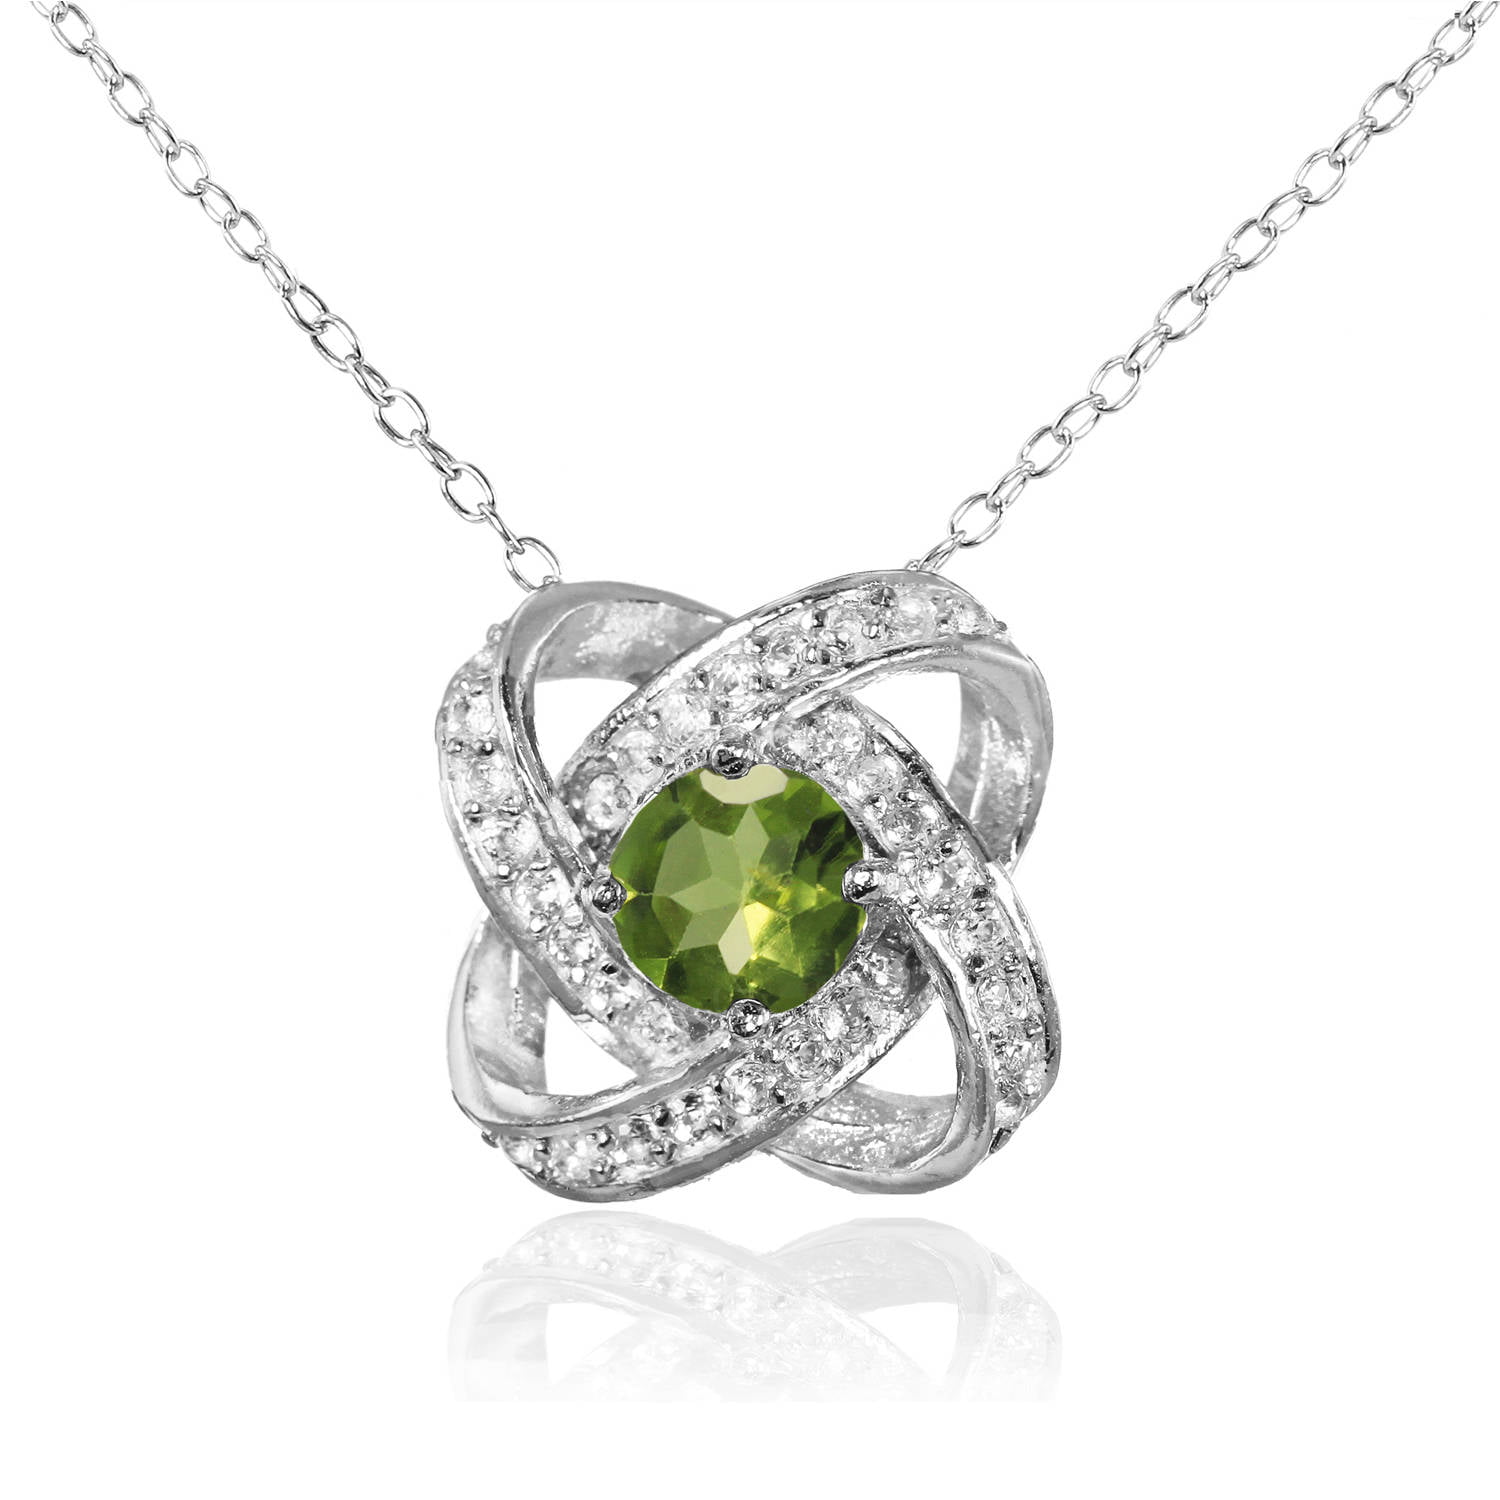 Sterling Silver Peridot and White Topaz Love Knot Necklace 